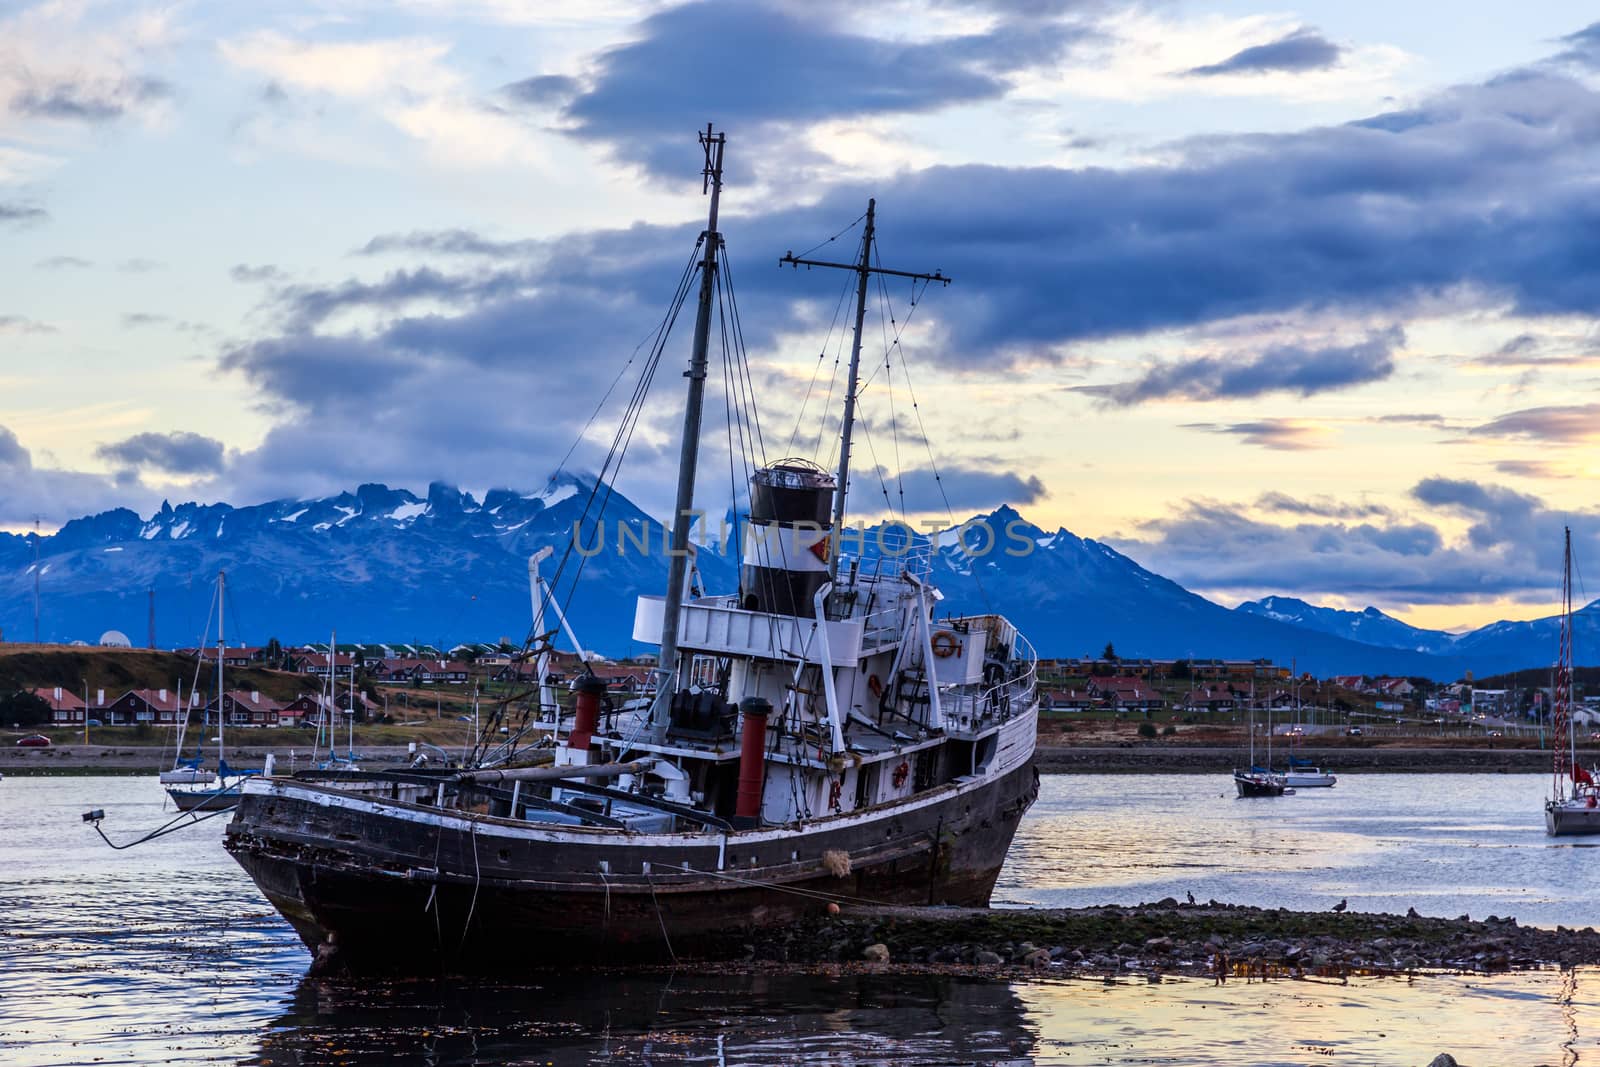 Old broken ship stranded ashore and village with mountains in the background, Ushuaia, Patagonia, Argentina